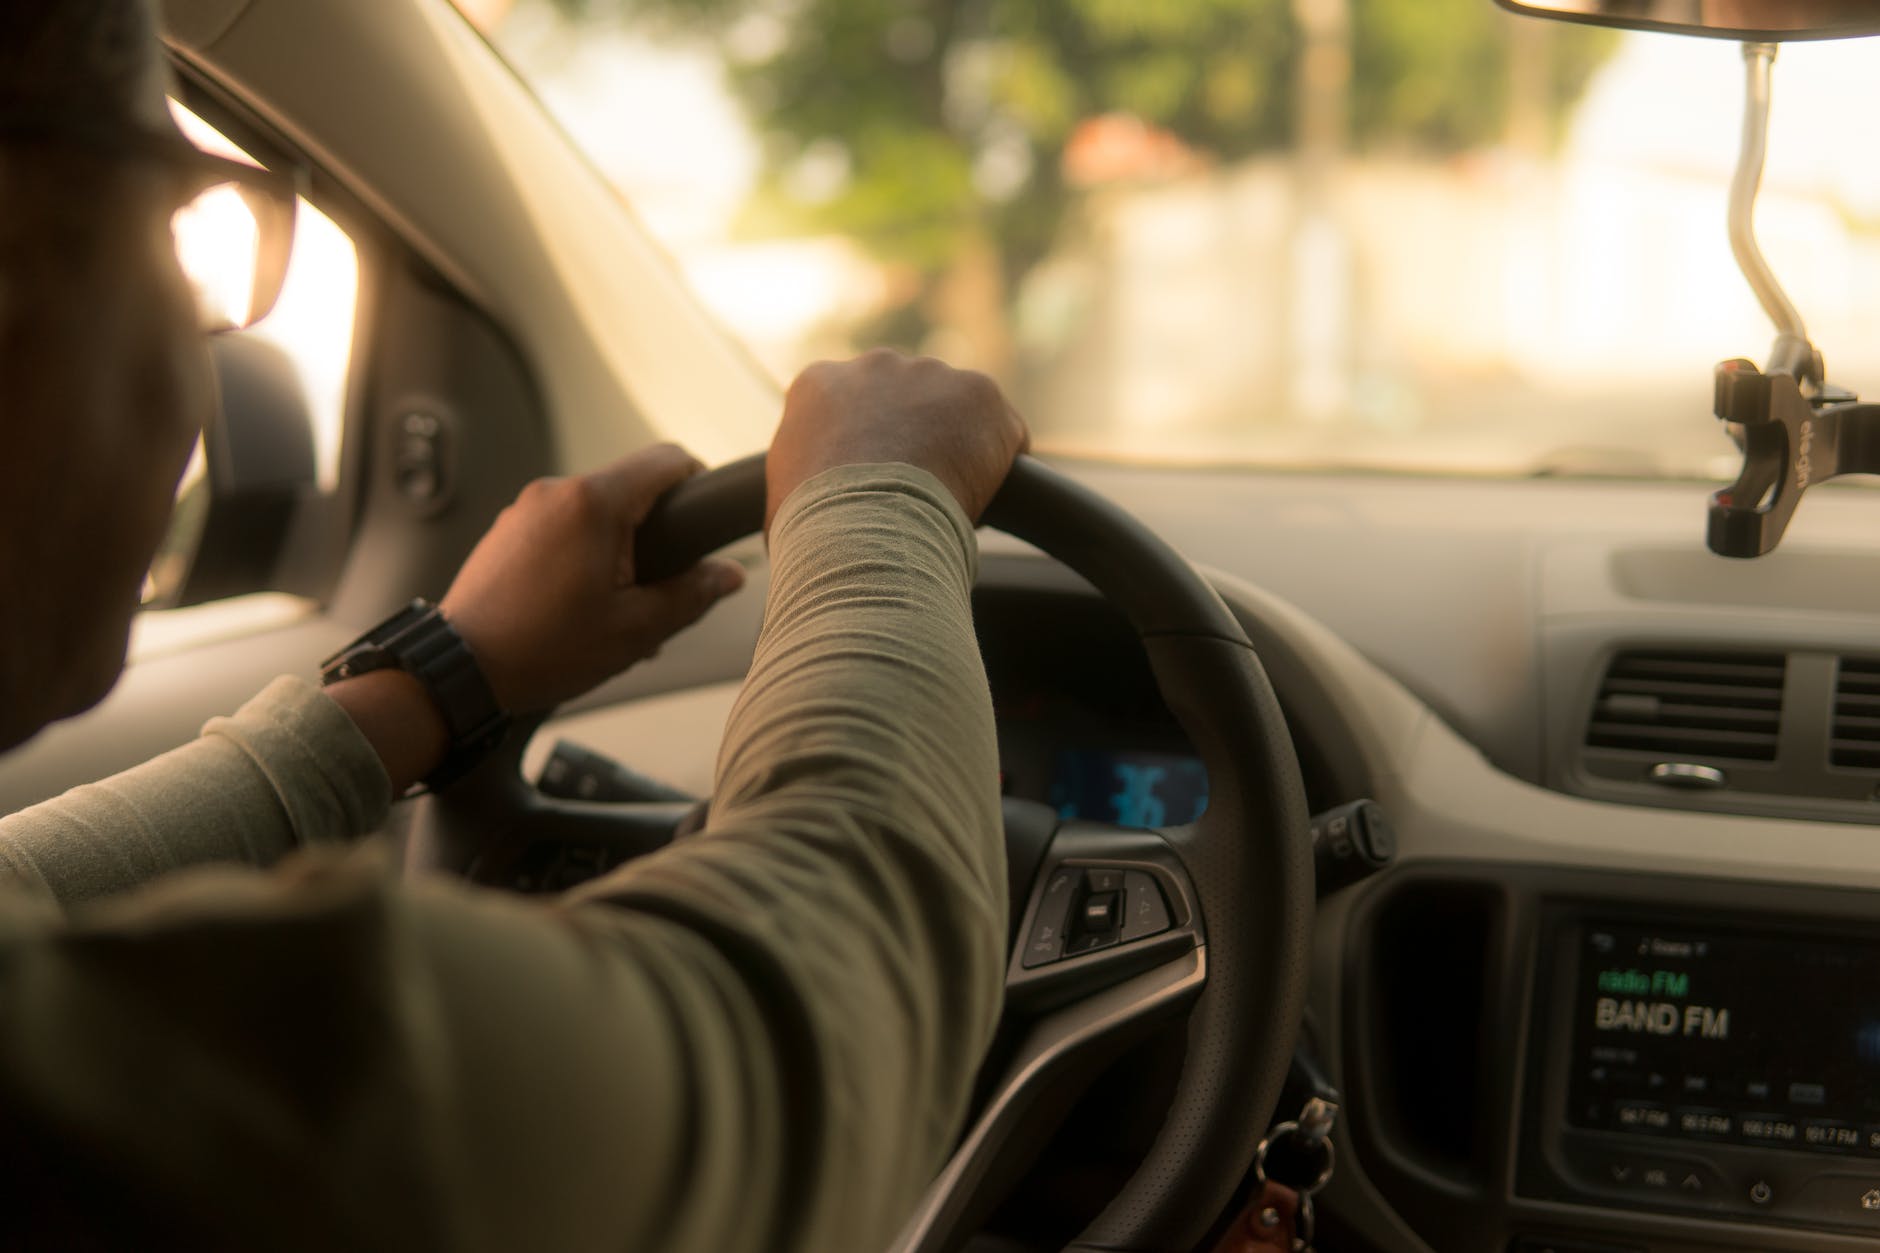 Josh scolded his son in the car. | Source: Pexels